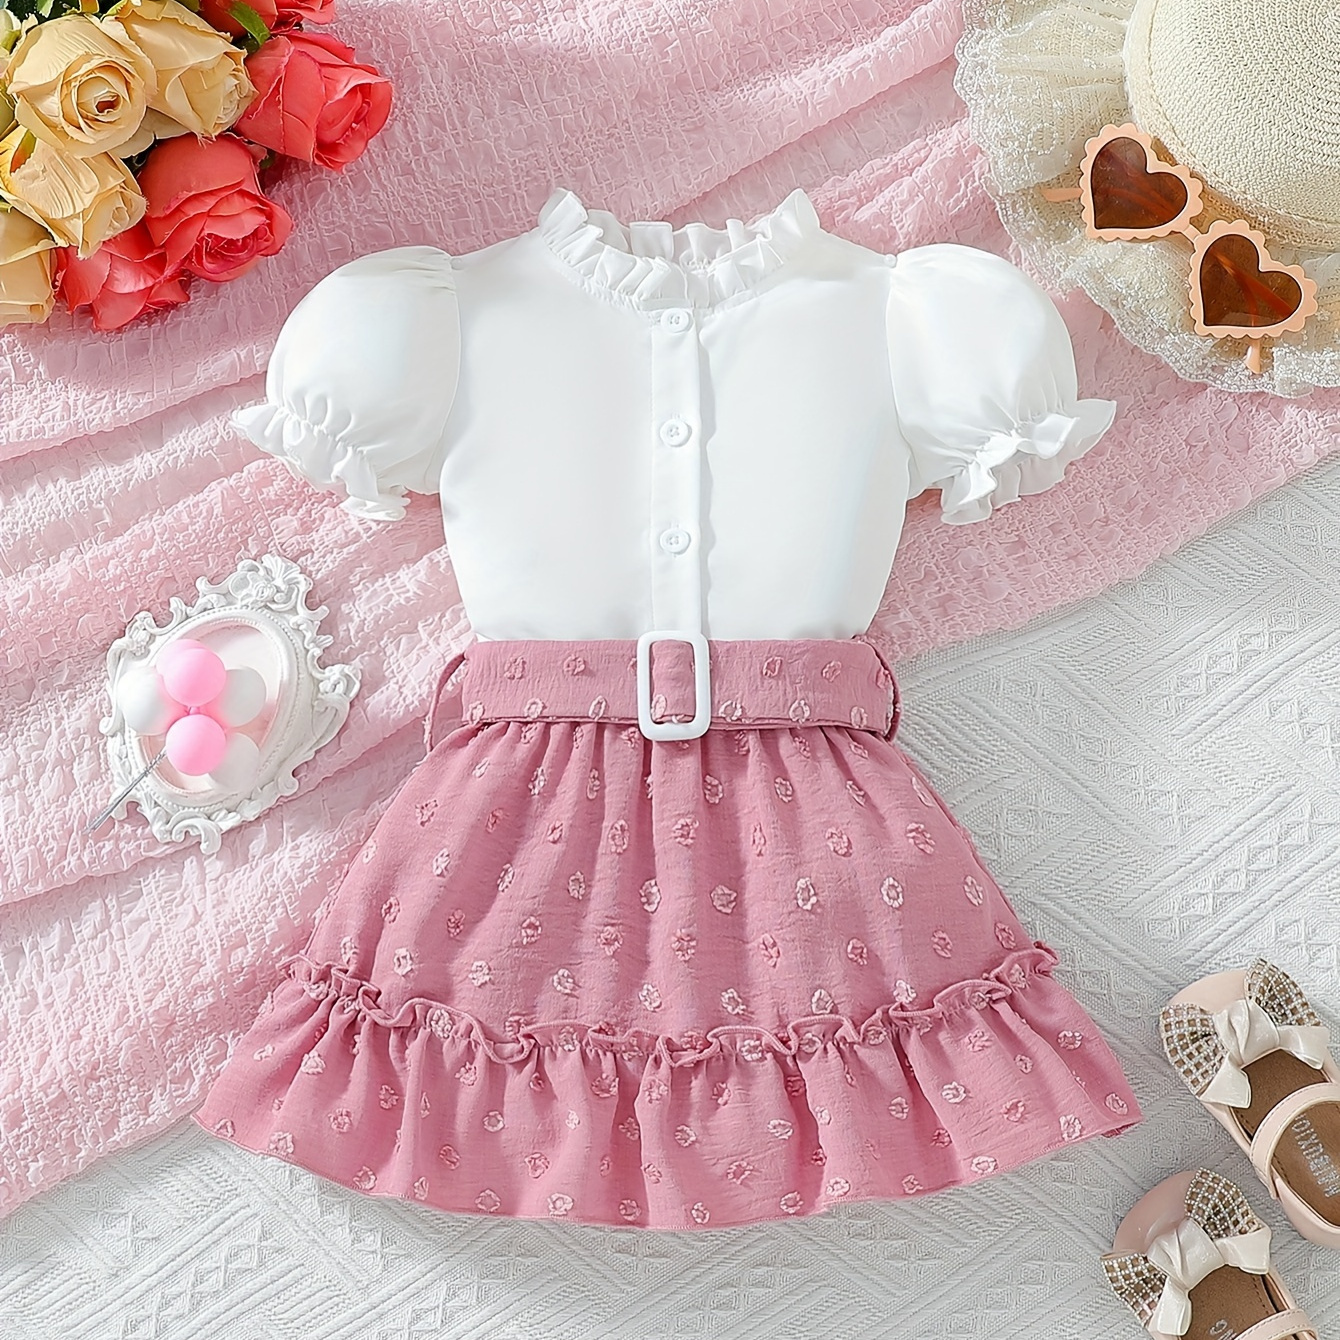 

Baby's Elegant 2pcs Summer Outfit, Puff Sleeve Blouse & Jacquard Ruffle Trim Skirt Set, Toddler & Infant Girl's Clothes For Daily/holiday, As Gift